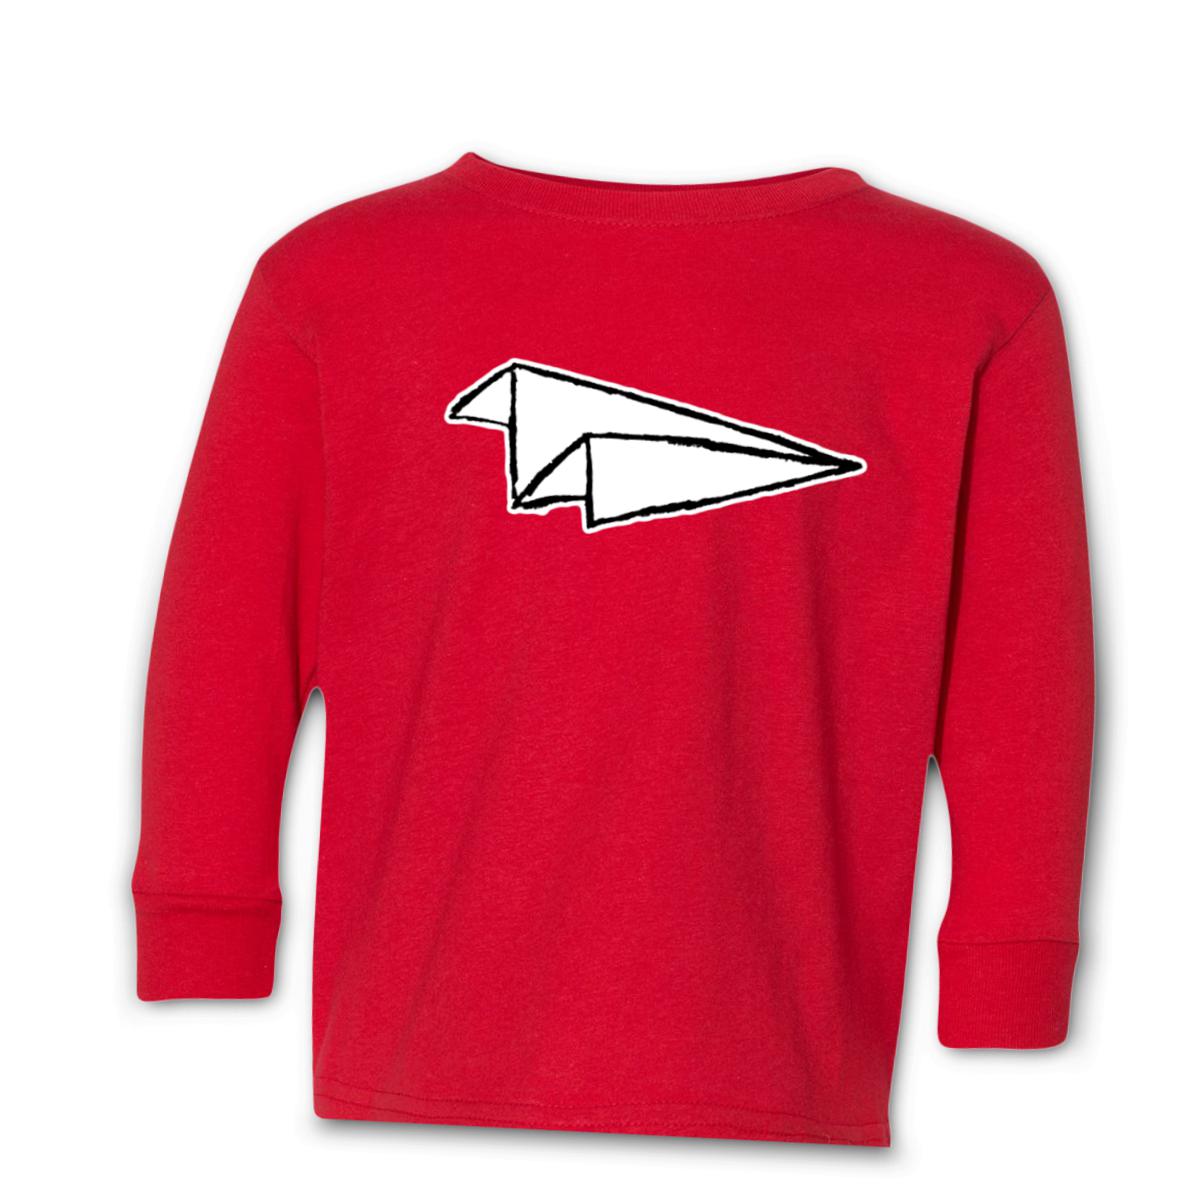 Airplane Sketch Toddler Long Sleeve Tee 4T red